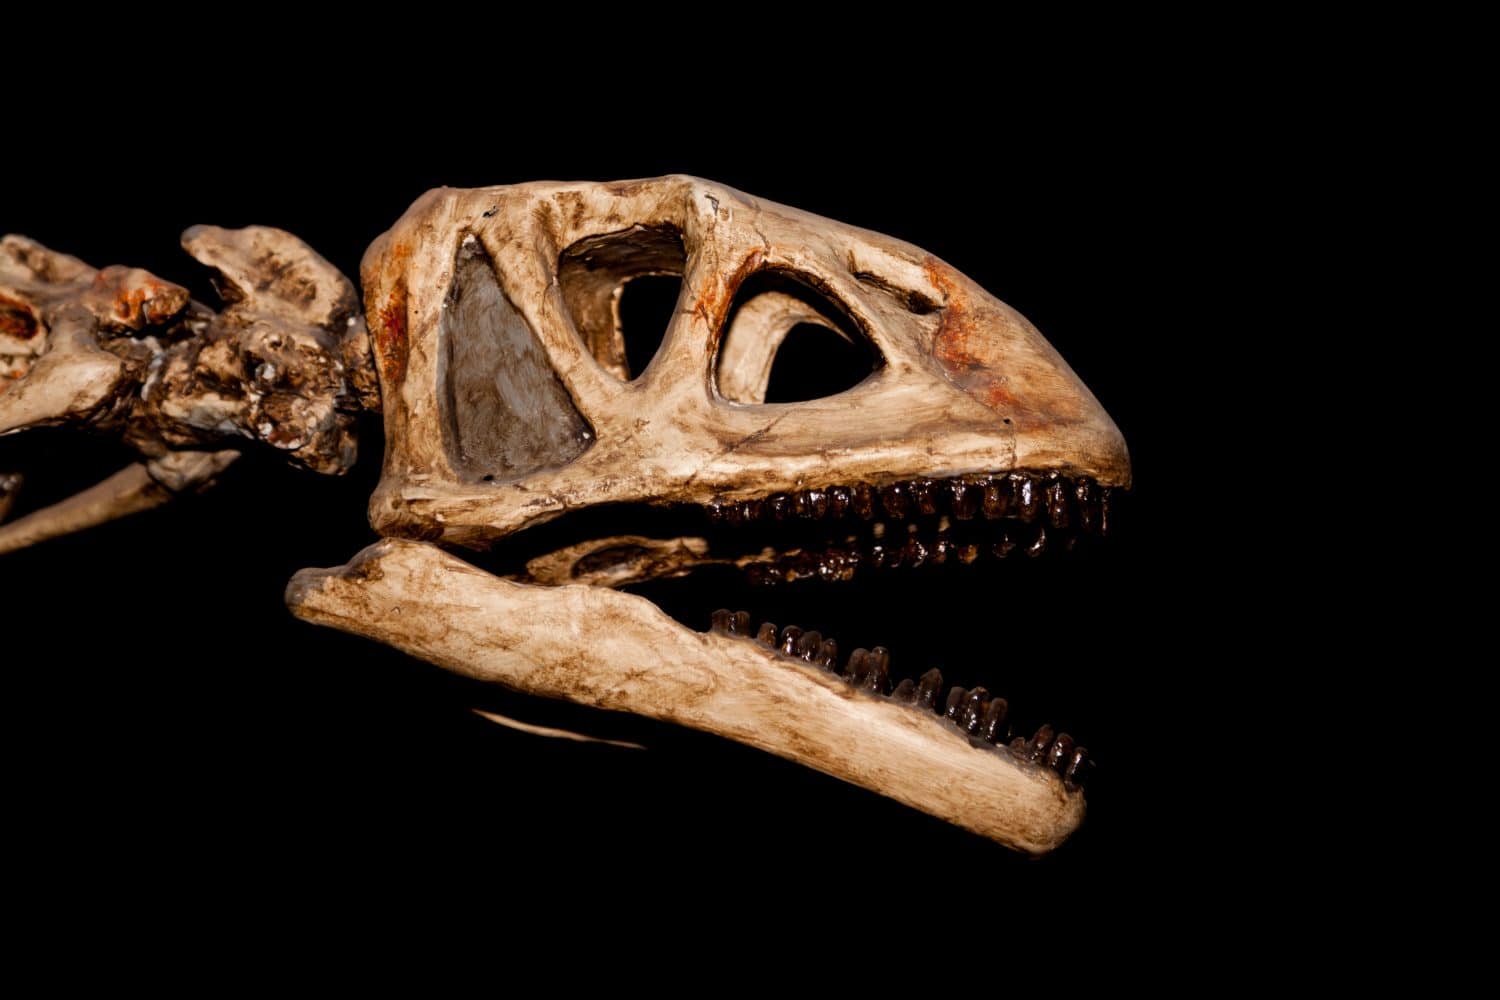 The skeleton of a scary large dinosaur head with its mouth open isolate on a black background.